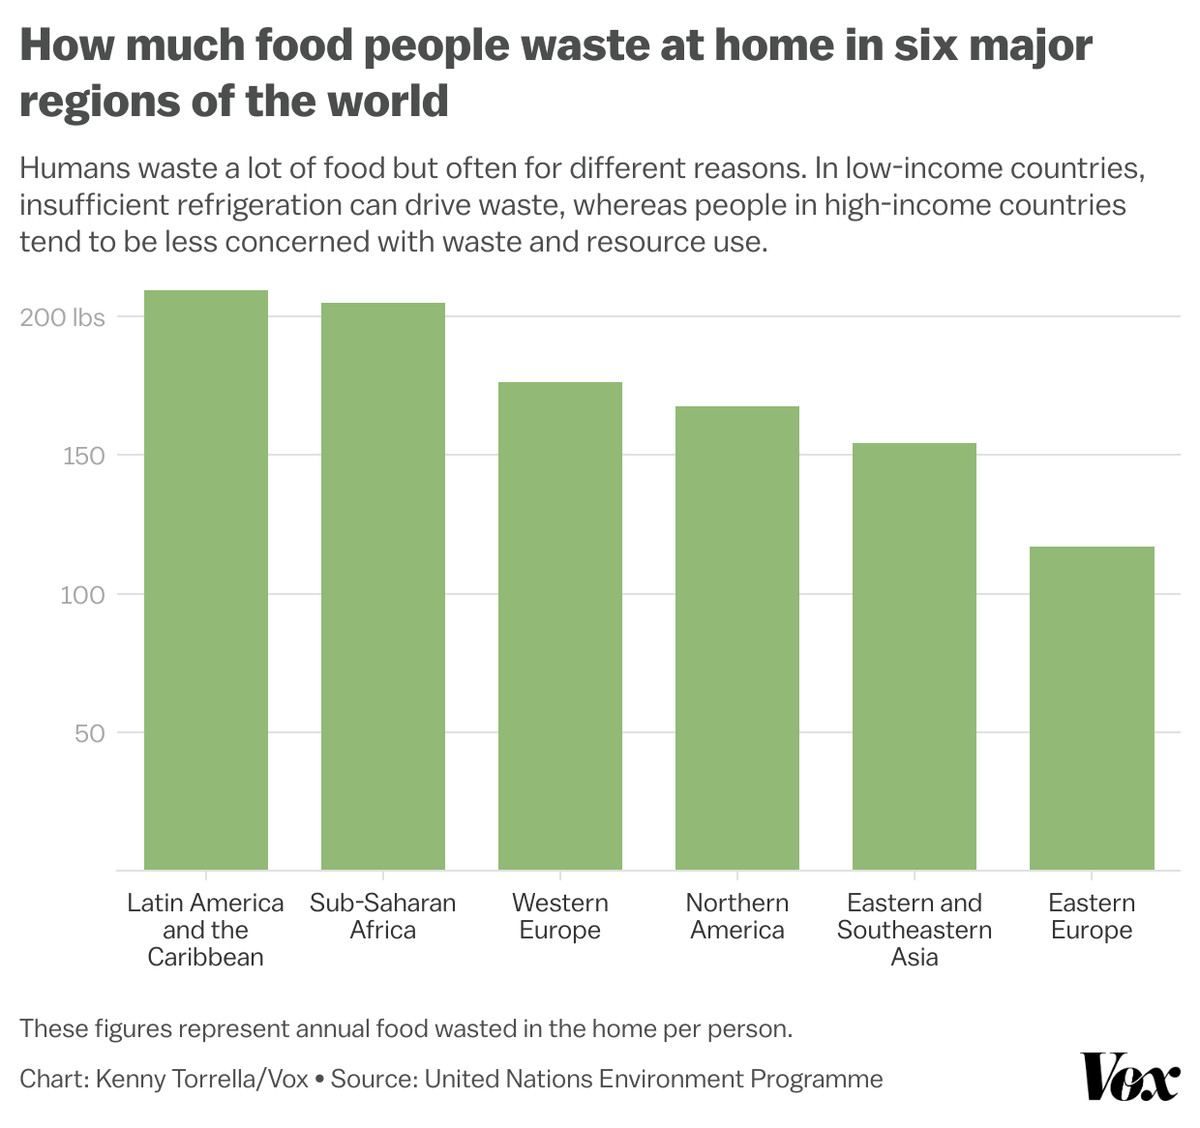 Bar graph titled “How much food people waste at home in six major regions of the world”. It also says “Humans waste a lot of food but often for different reasons. In low-income countries, insufficient refrigeration can drive waste, whereas people in high-income countries tend to be less concerned with waste and resource use.” From most waste to least, the regions are Latin America/the Caribbean, Sub-Saharan Africa, Western Europe, Northern America, Eastern/Southeastern Asia, and Eastern Europe.